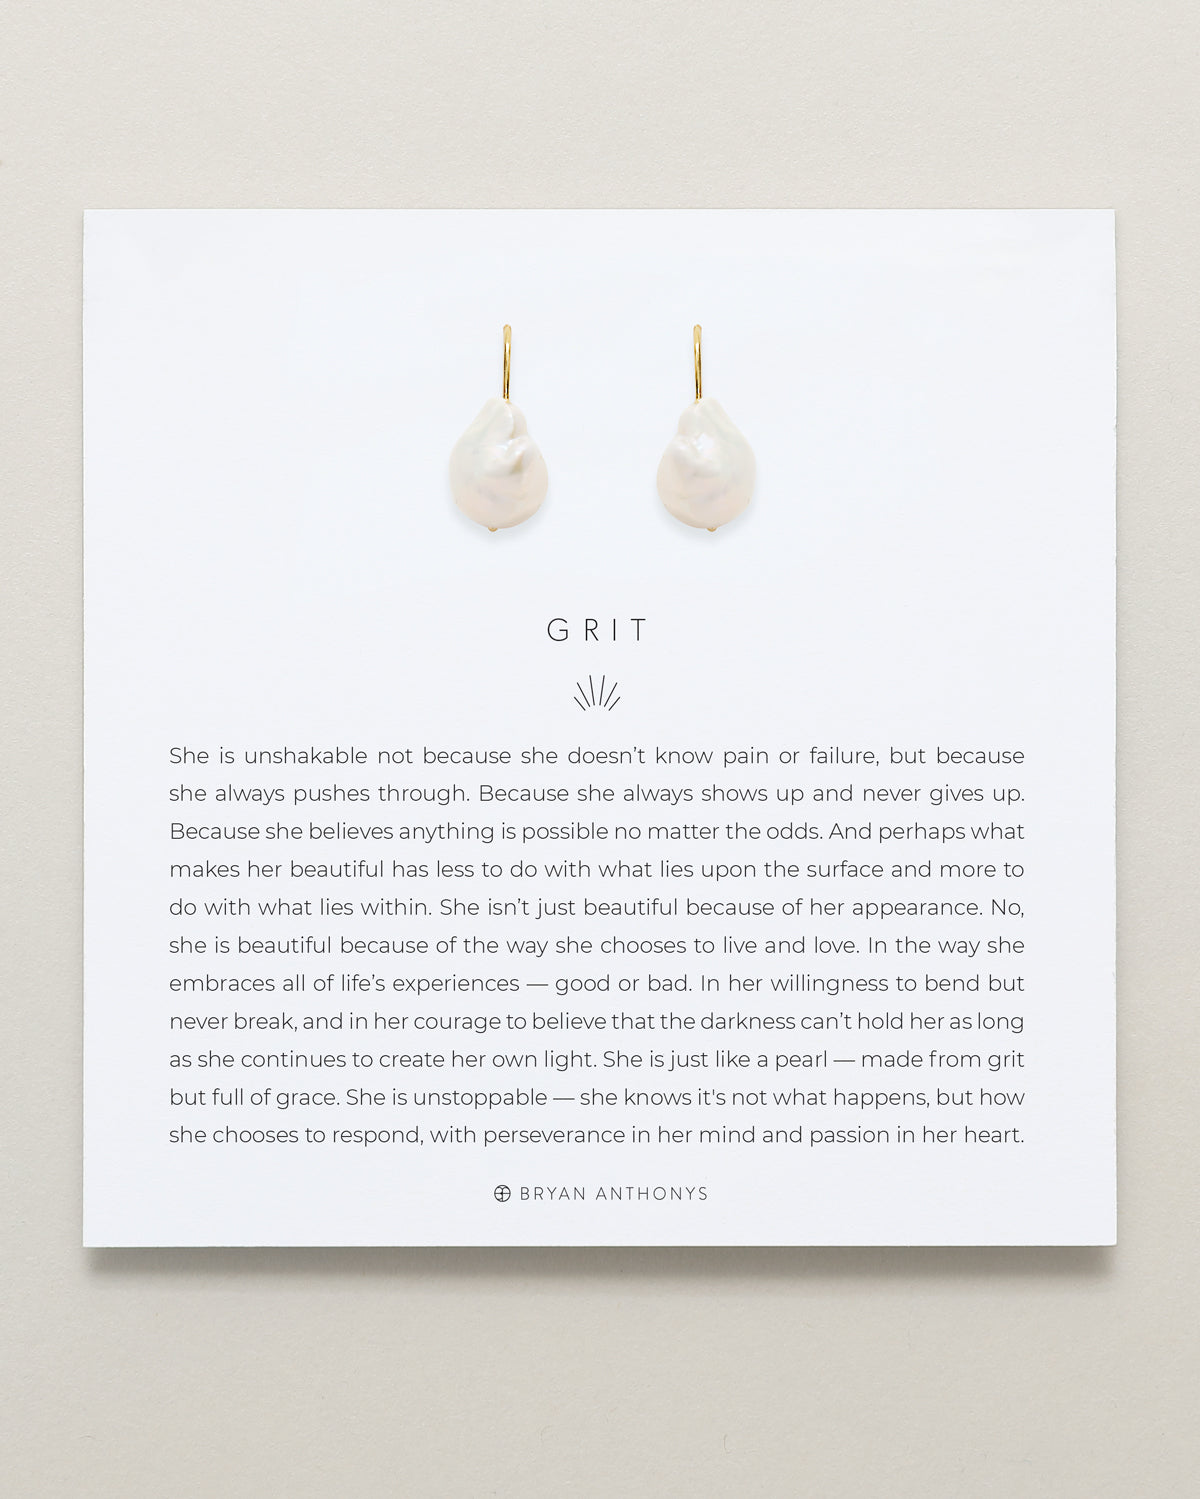 Bryan Anthonys Grit Gold Drop Earrings On Card